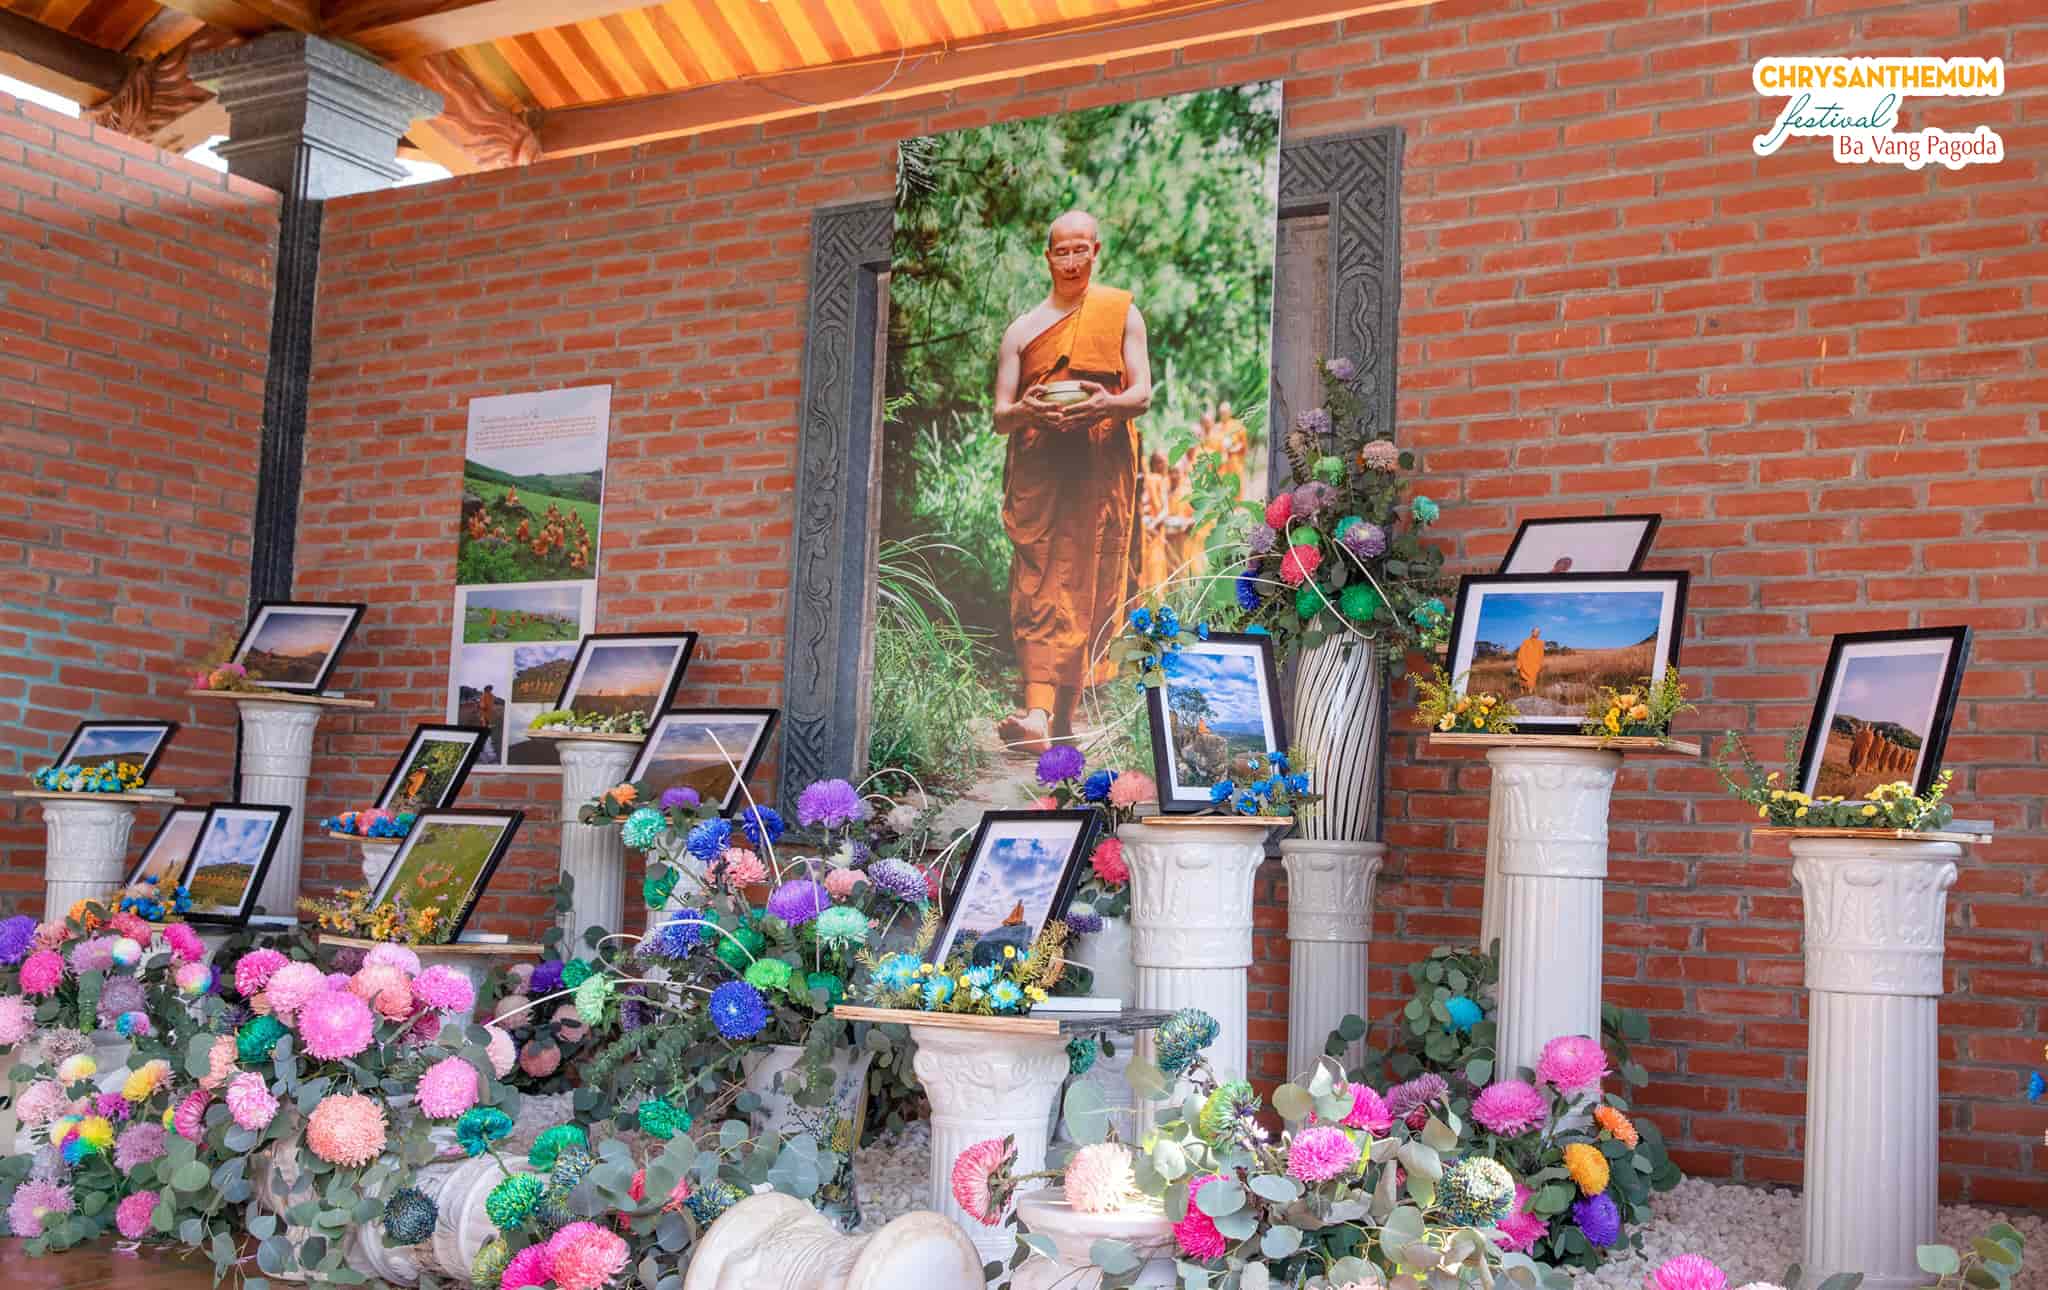 A small part of the Photo Exhibition at Chrysanthemum Festival 2020 - Ba Vang Pagoda. The exhibition is decorated with various colourful chrysanthemums.